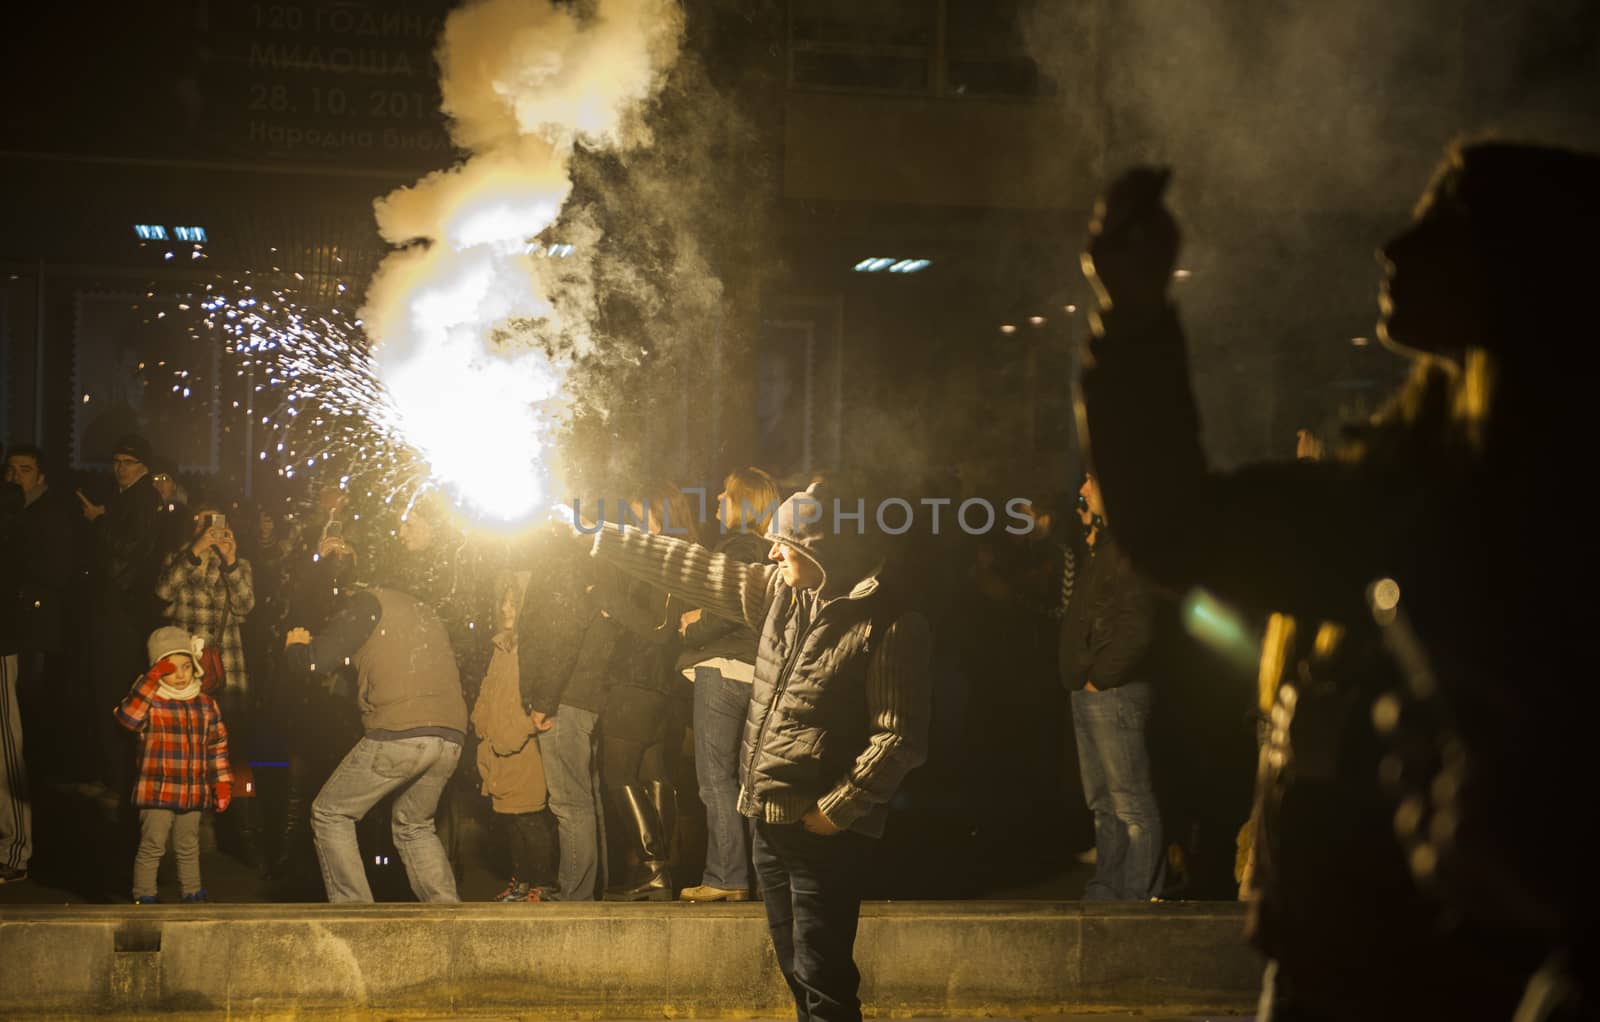 Serbian New years eve celebration in front of the St. Sava's tem by krutenyuk